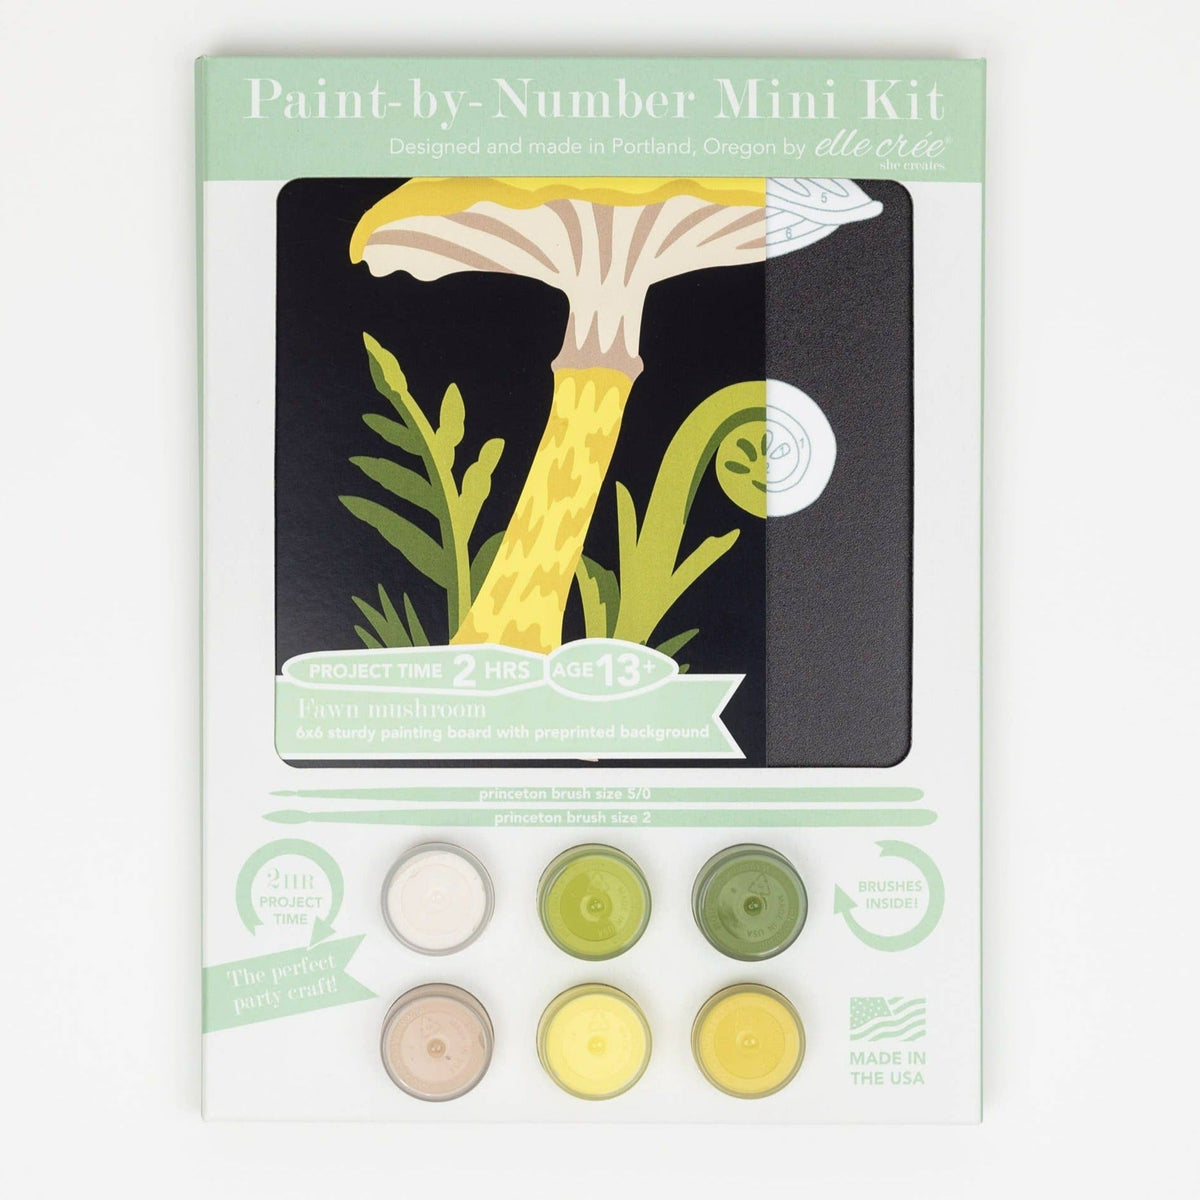 Paint-by-Number Kit - Mini - Fawn Mushrooms - Gift & Gather